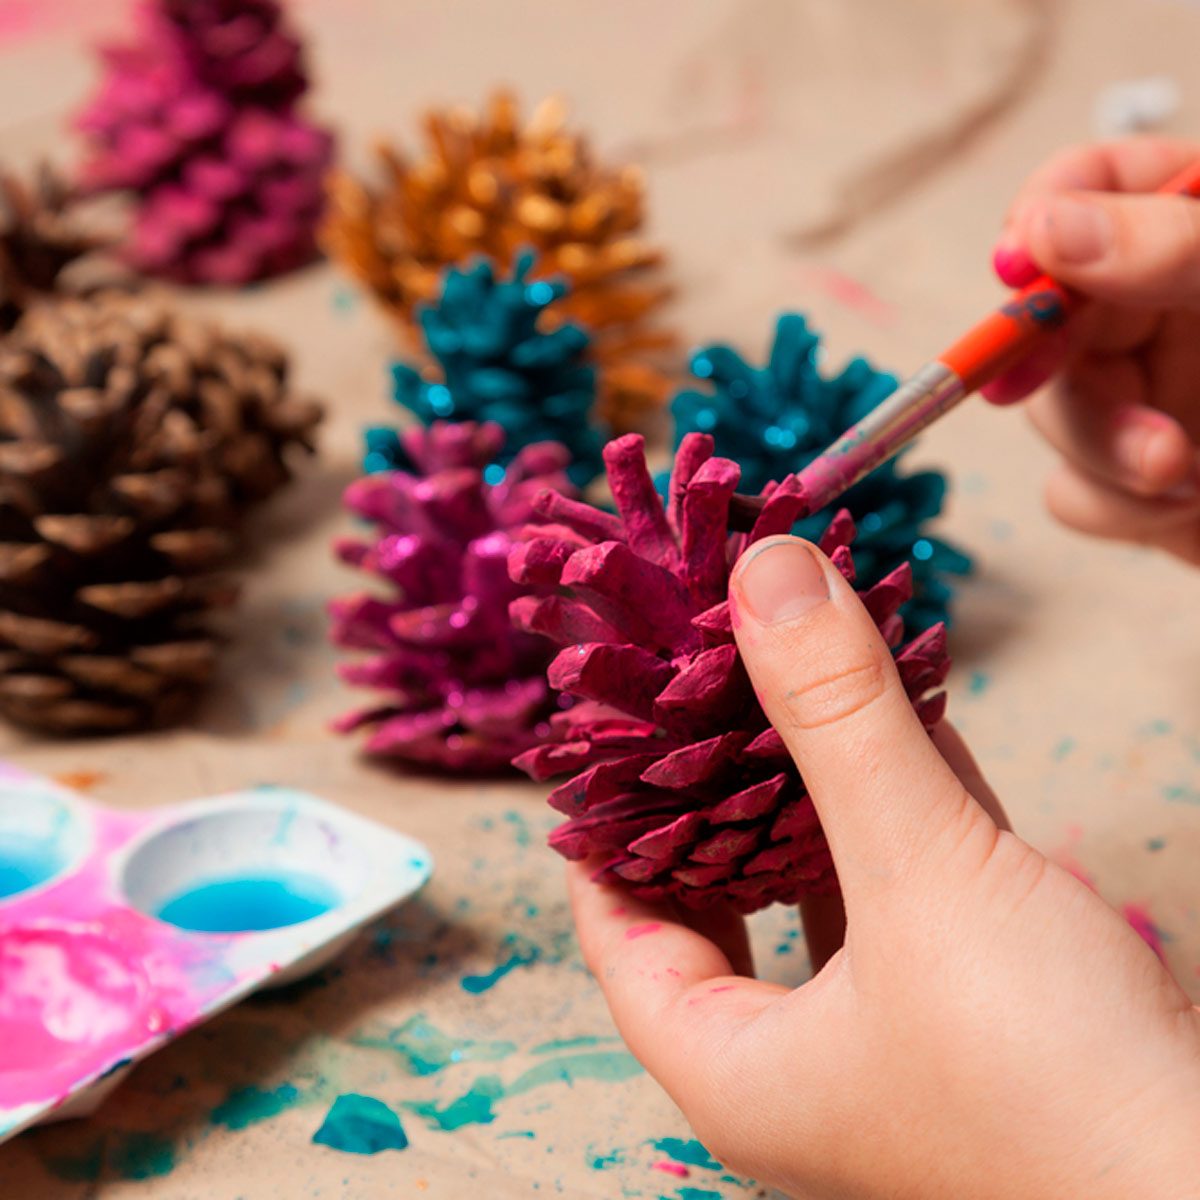 How to Make Quick and Easy Pine Cone Picks • Craft Invaders